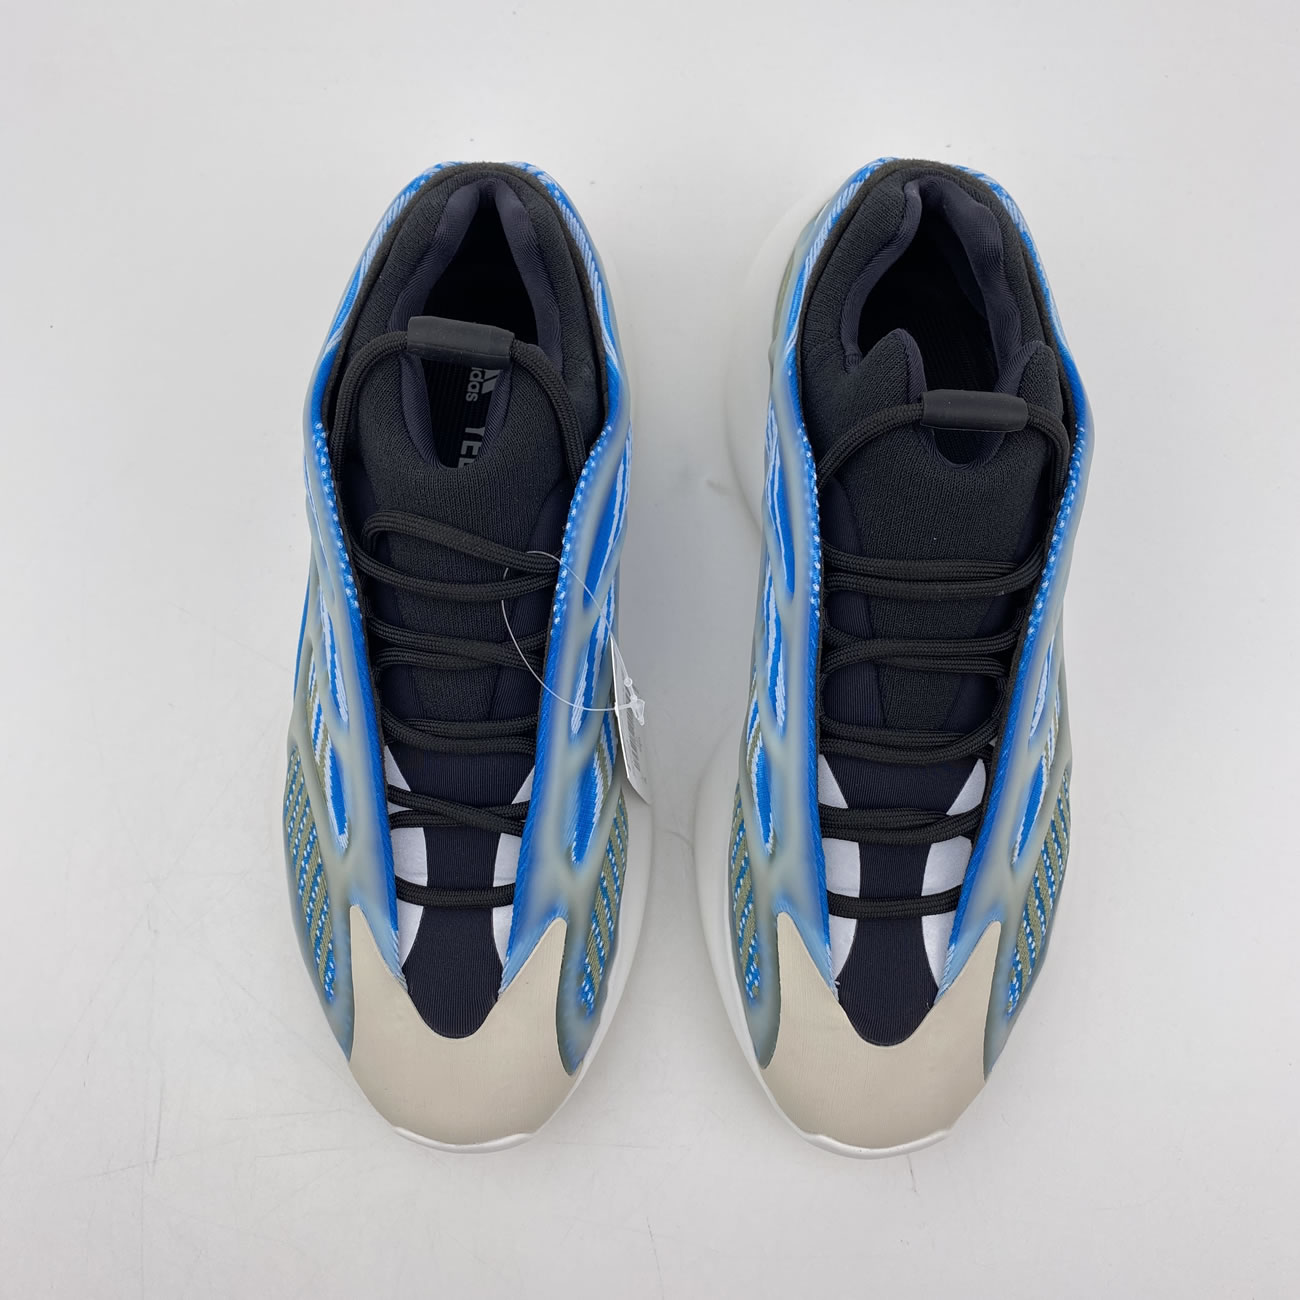 Adidas Yeezy 700 V3 Arazre G54850 New Release Date For Sale (4) - newkick.org